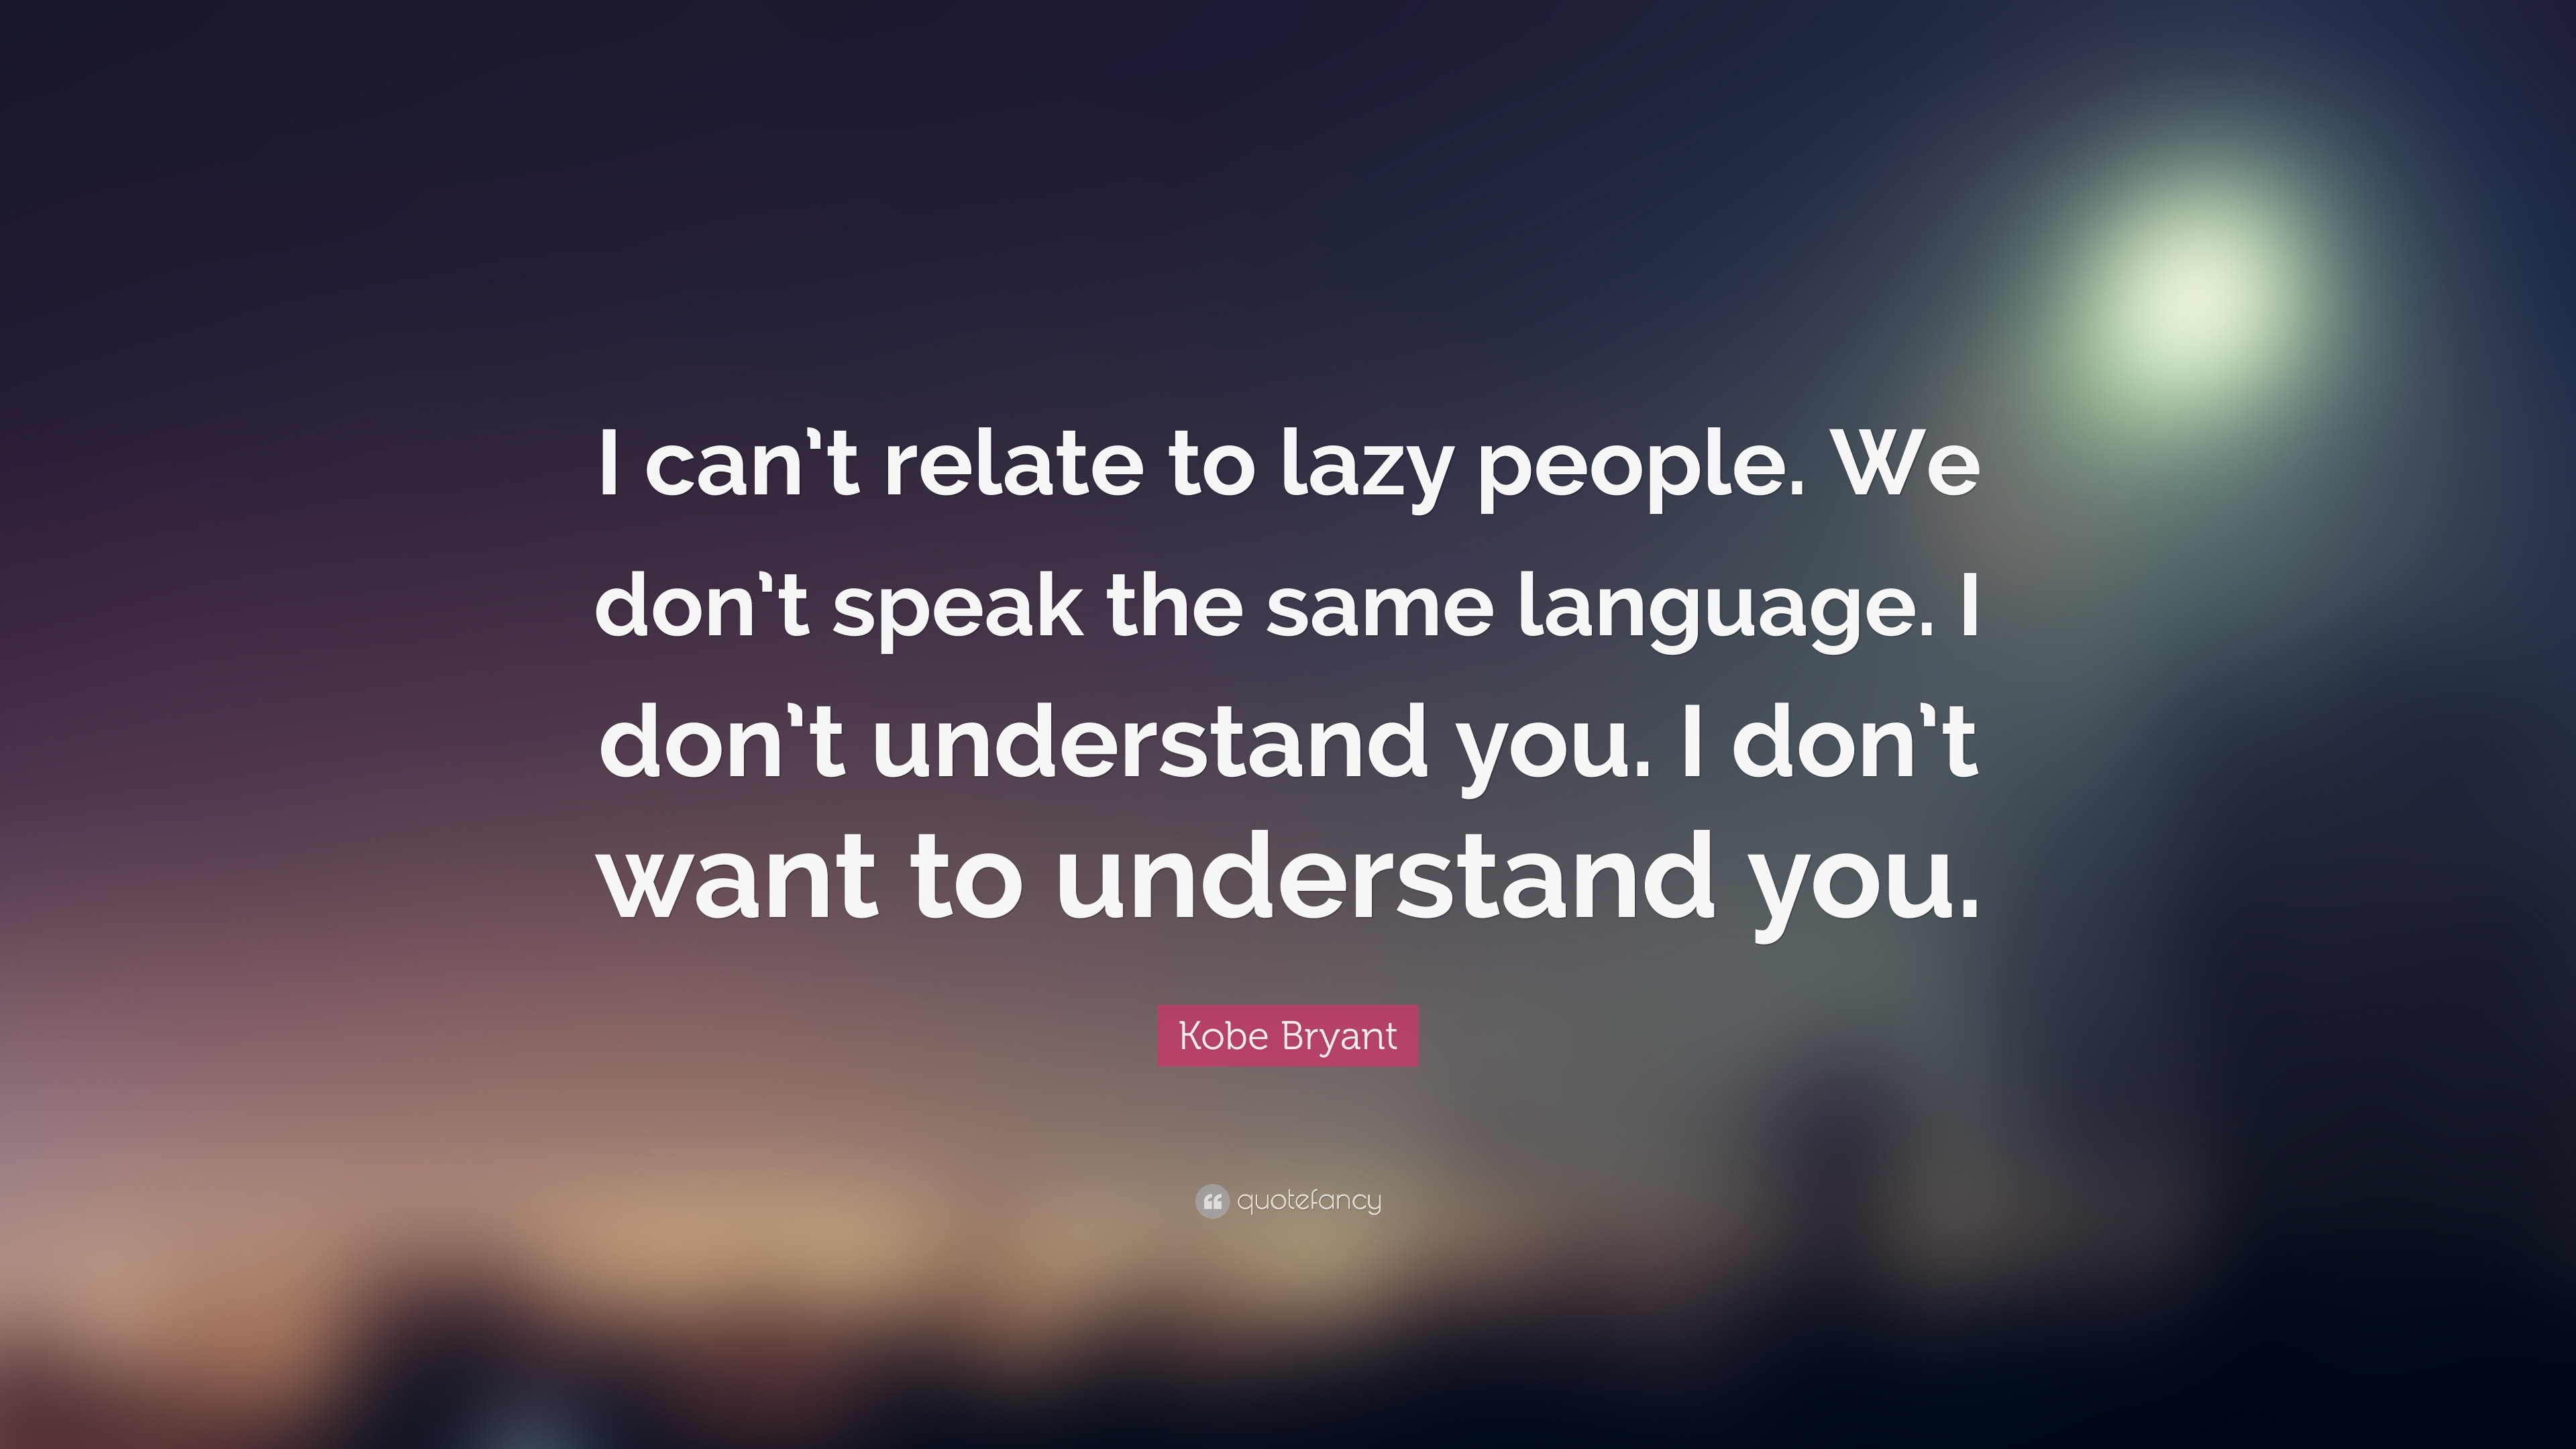 Kobe Bryant Quote: “I can’t relate to lazy people. We don’t speak the